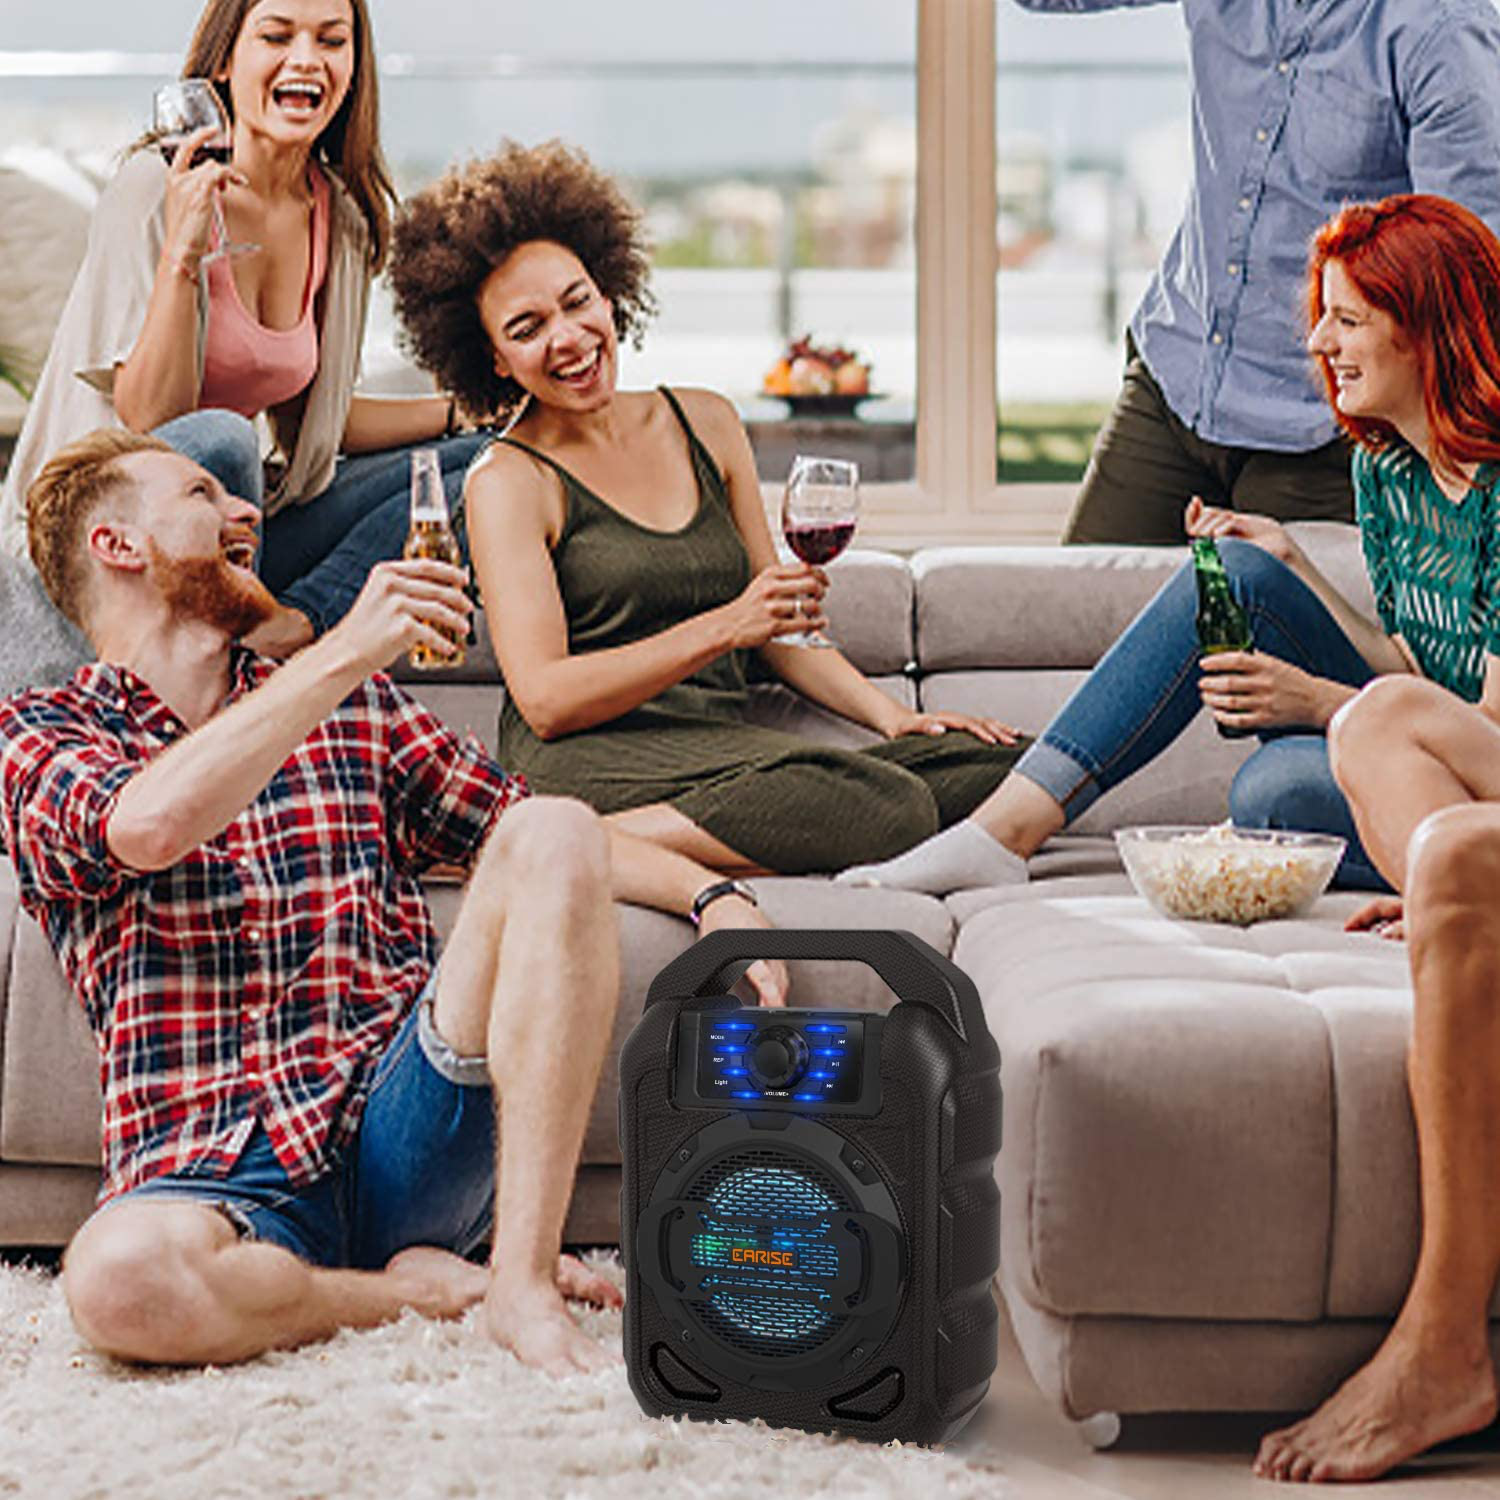 EARISE T15 Portable PA System Speaker for Kids & Adults with Wired Microphone, Bluetooth Karaoke Machine with Lights, Lightweight, Perfect for Outdoors